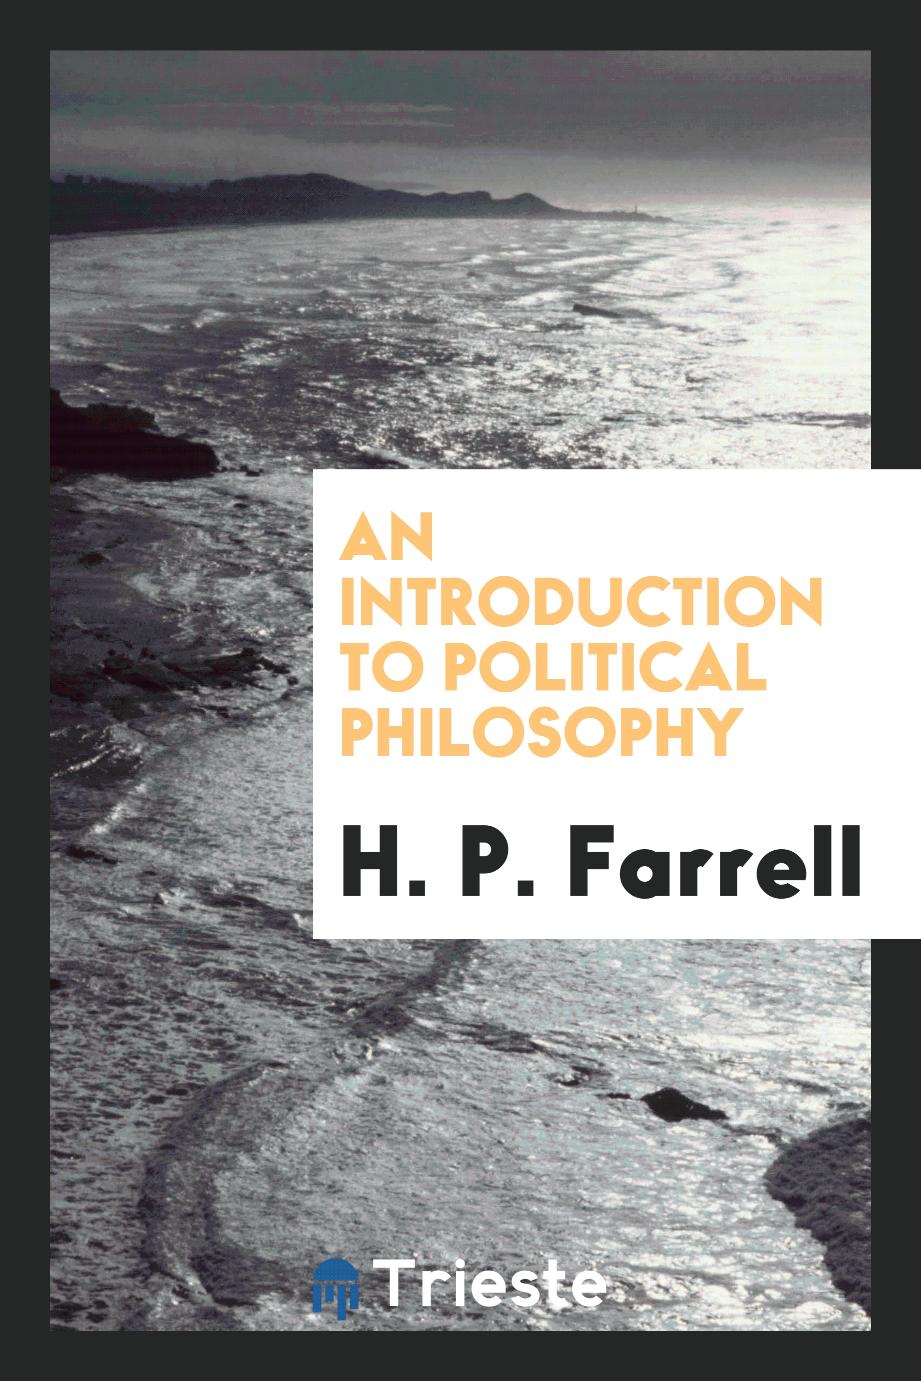 An introduction to political philosophy